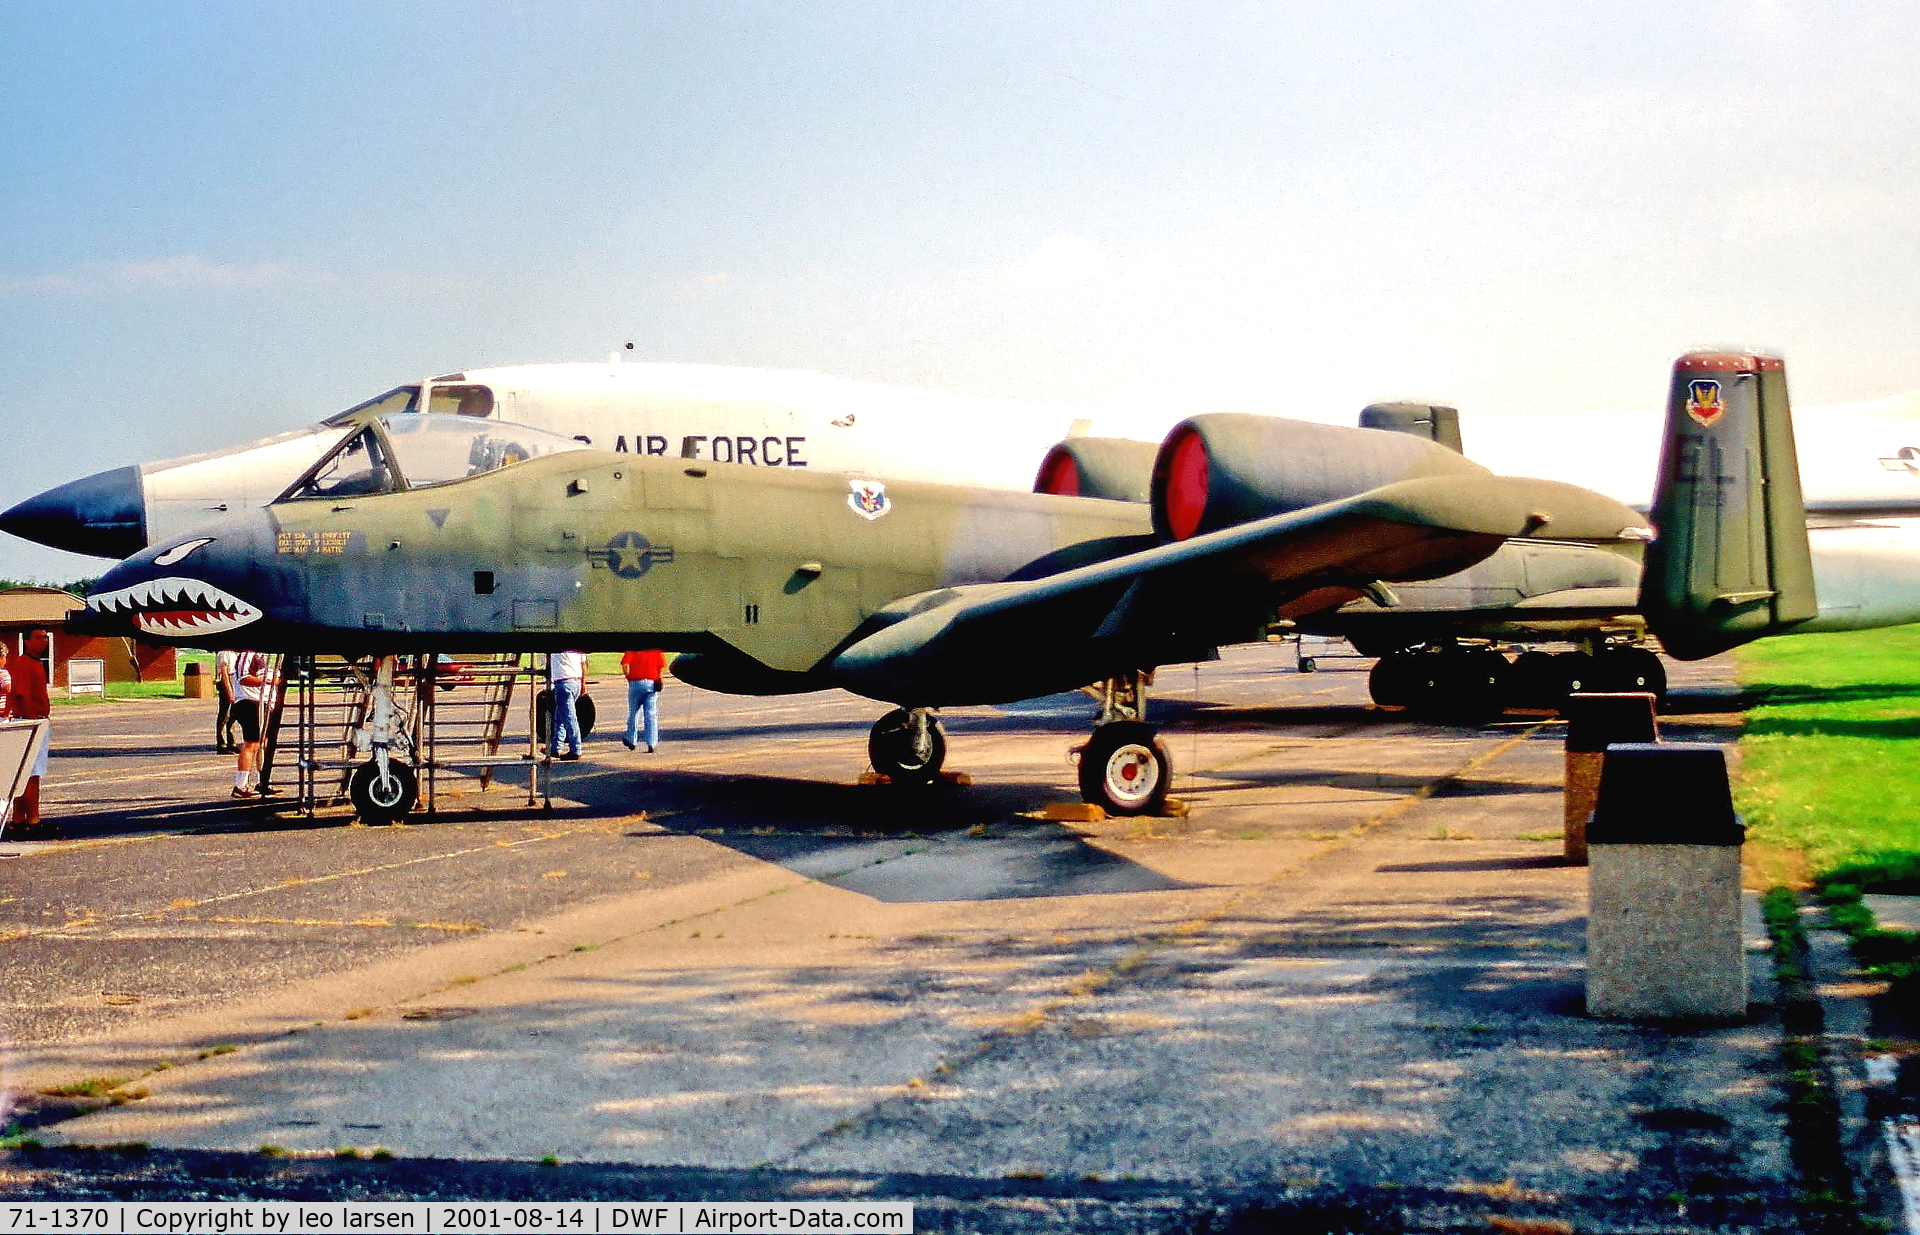 71-1370, 1971 Fairchild Republic YA-10A Thunderbolt II C/N 02 (Prototype), Dayton-Wright-Patterson AFB .Air Force museum14.8.2001.
With falsely painted s/n 79-0223